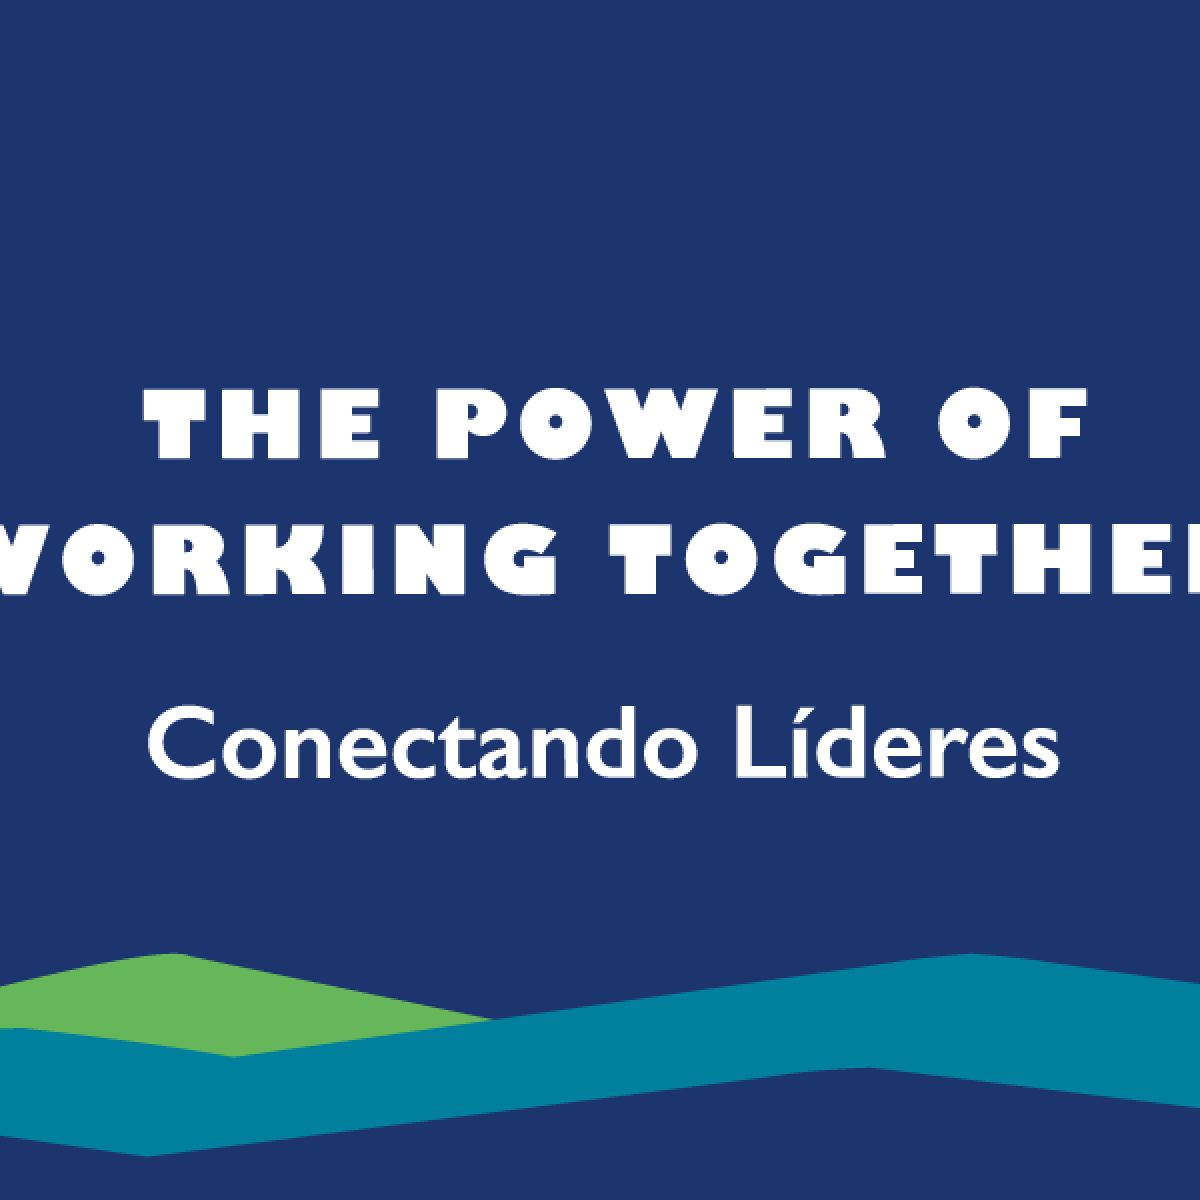 Banner for the event. It says: "The power of working together" with a blue background